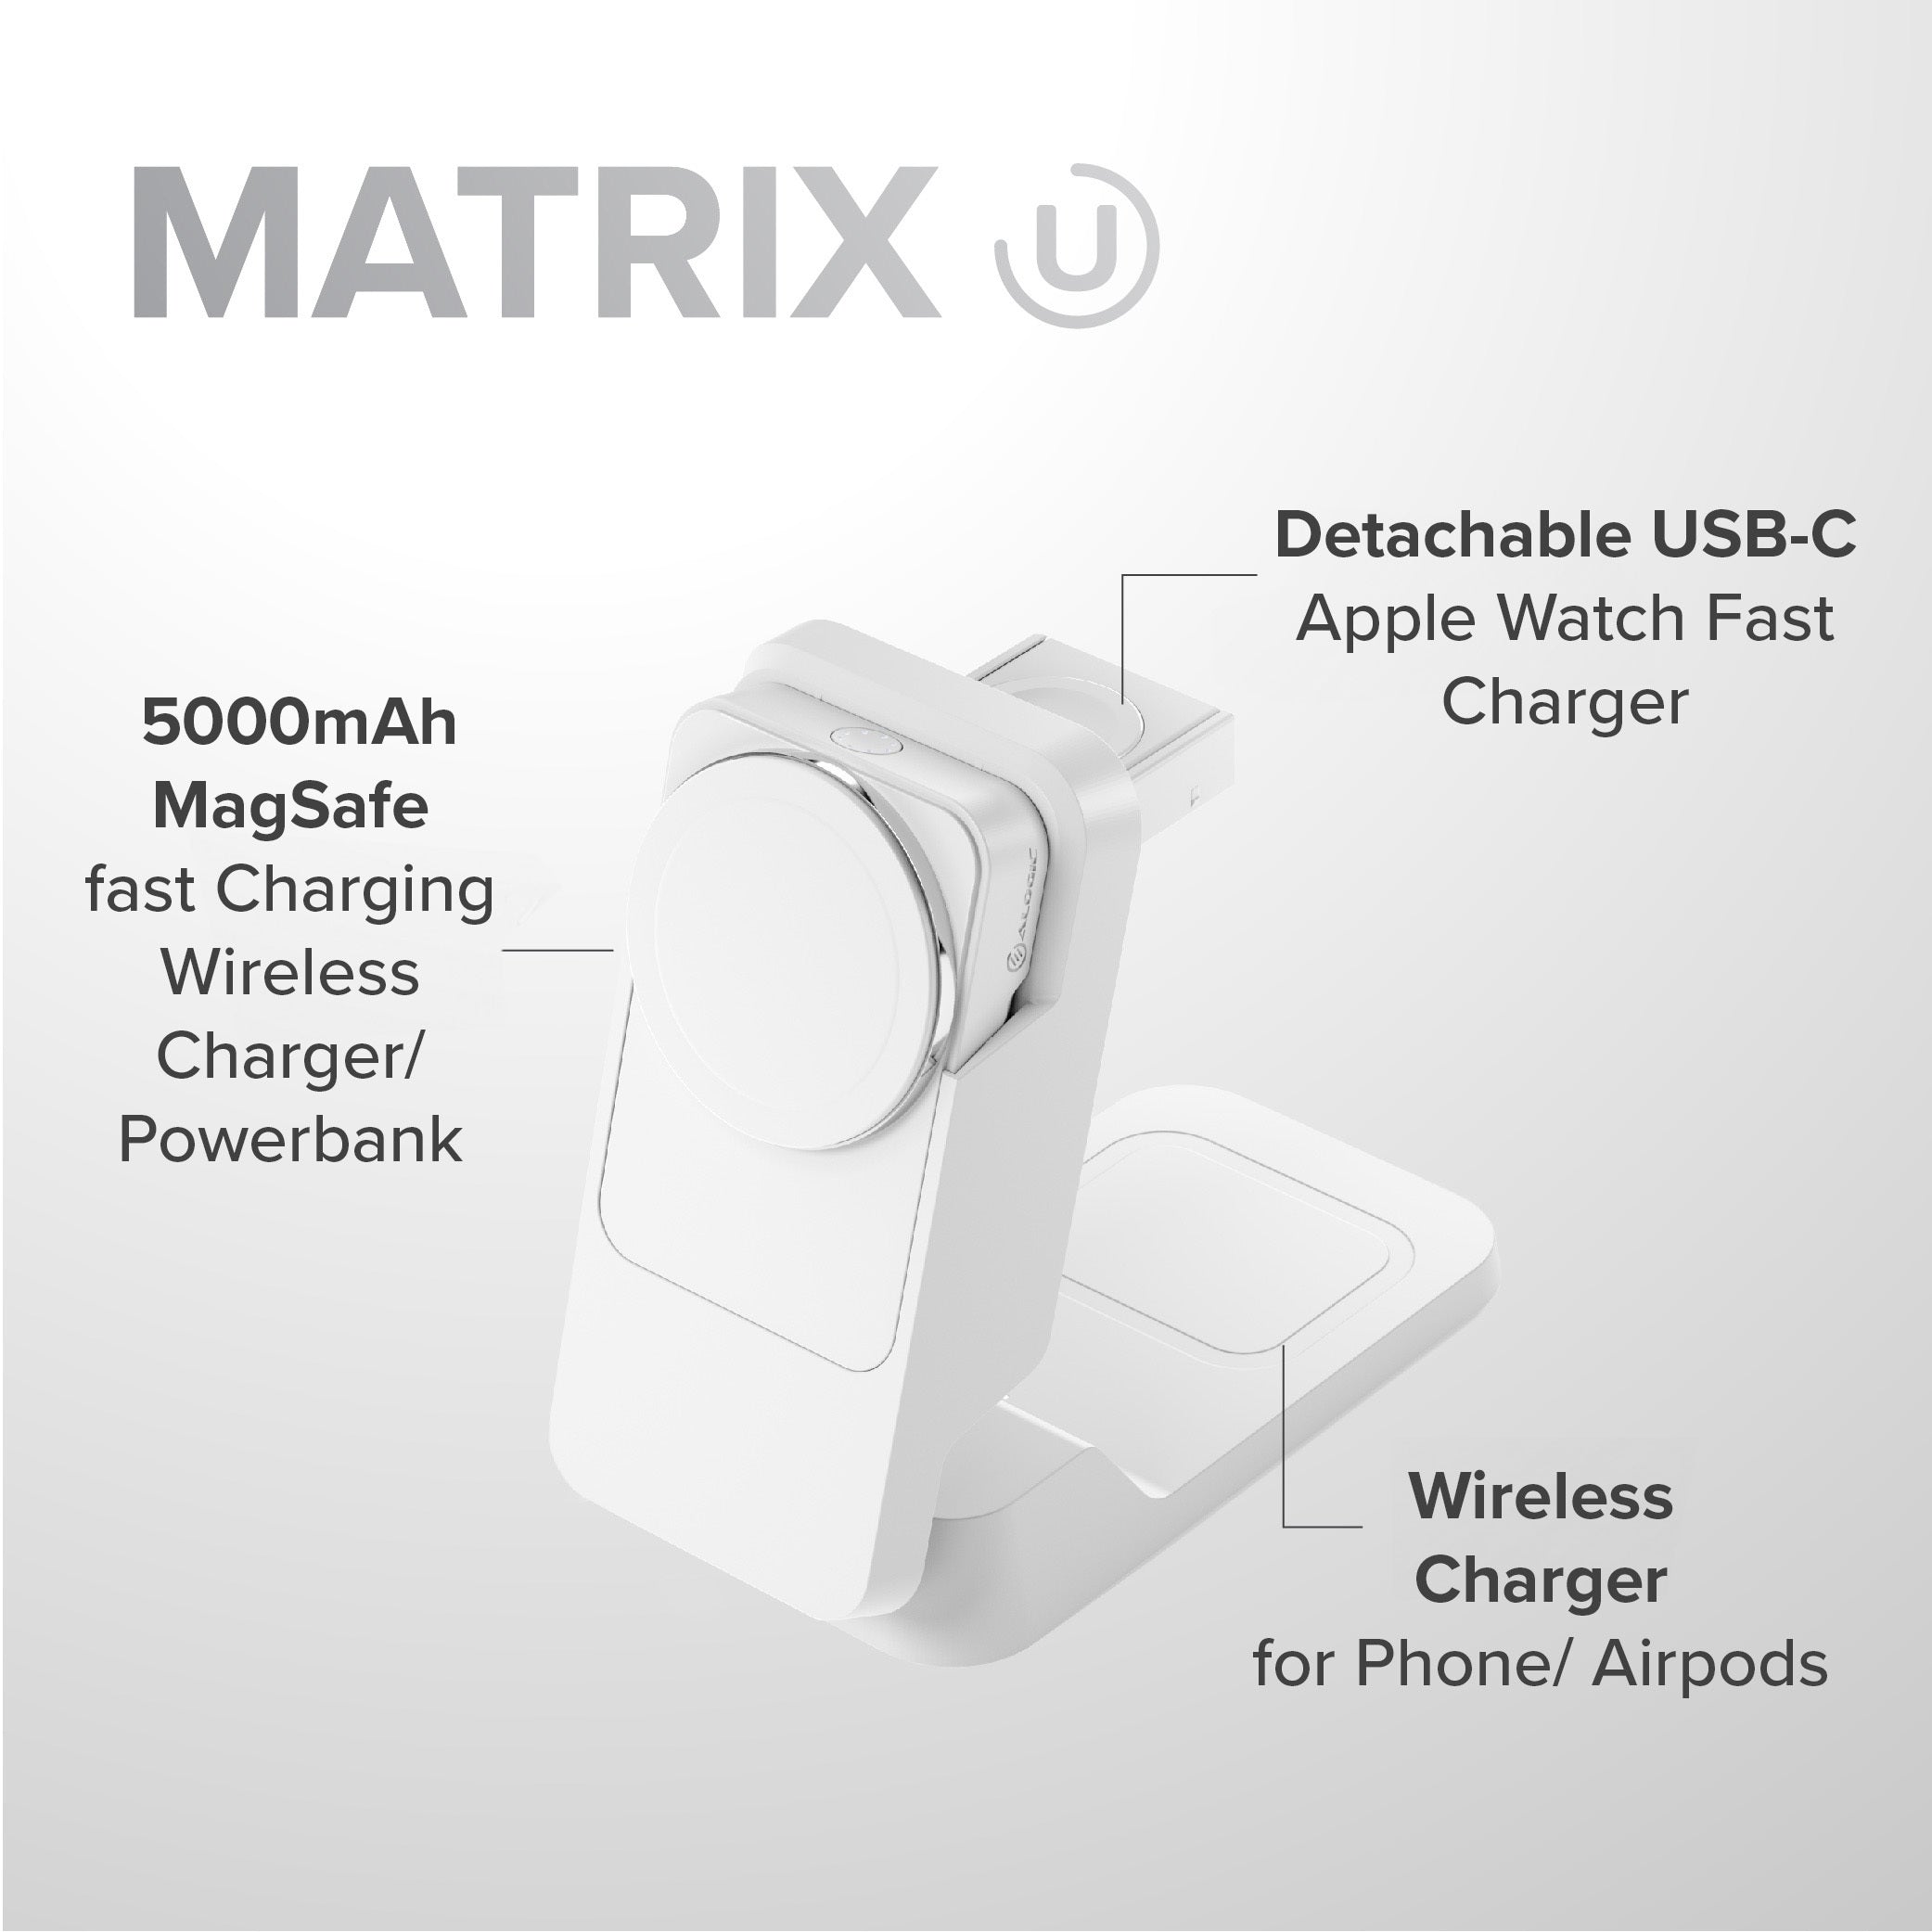 Matrix Ultimate 3-in-1 Wireless Charger with 5,000mAh MagSafe Power Bank - Global Edition